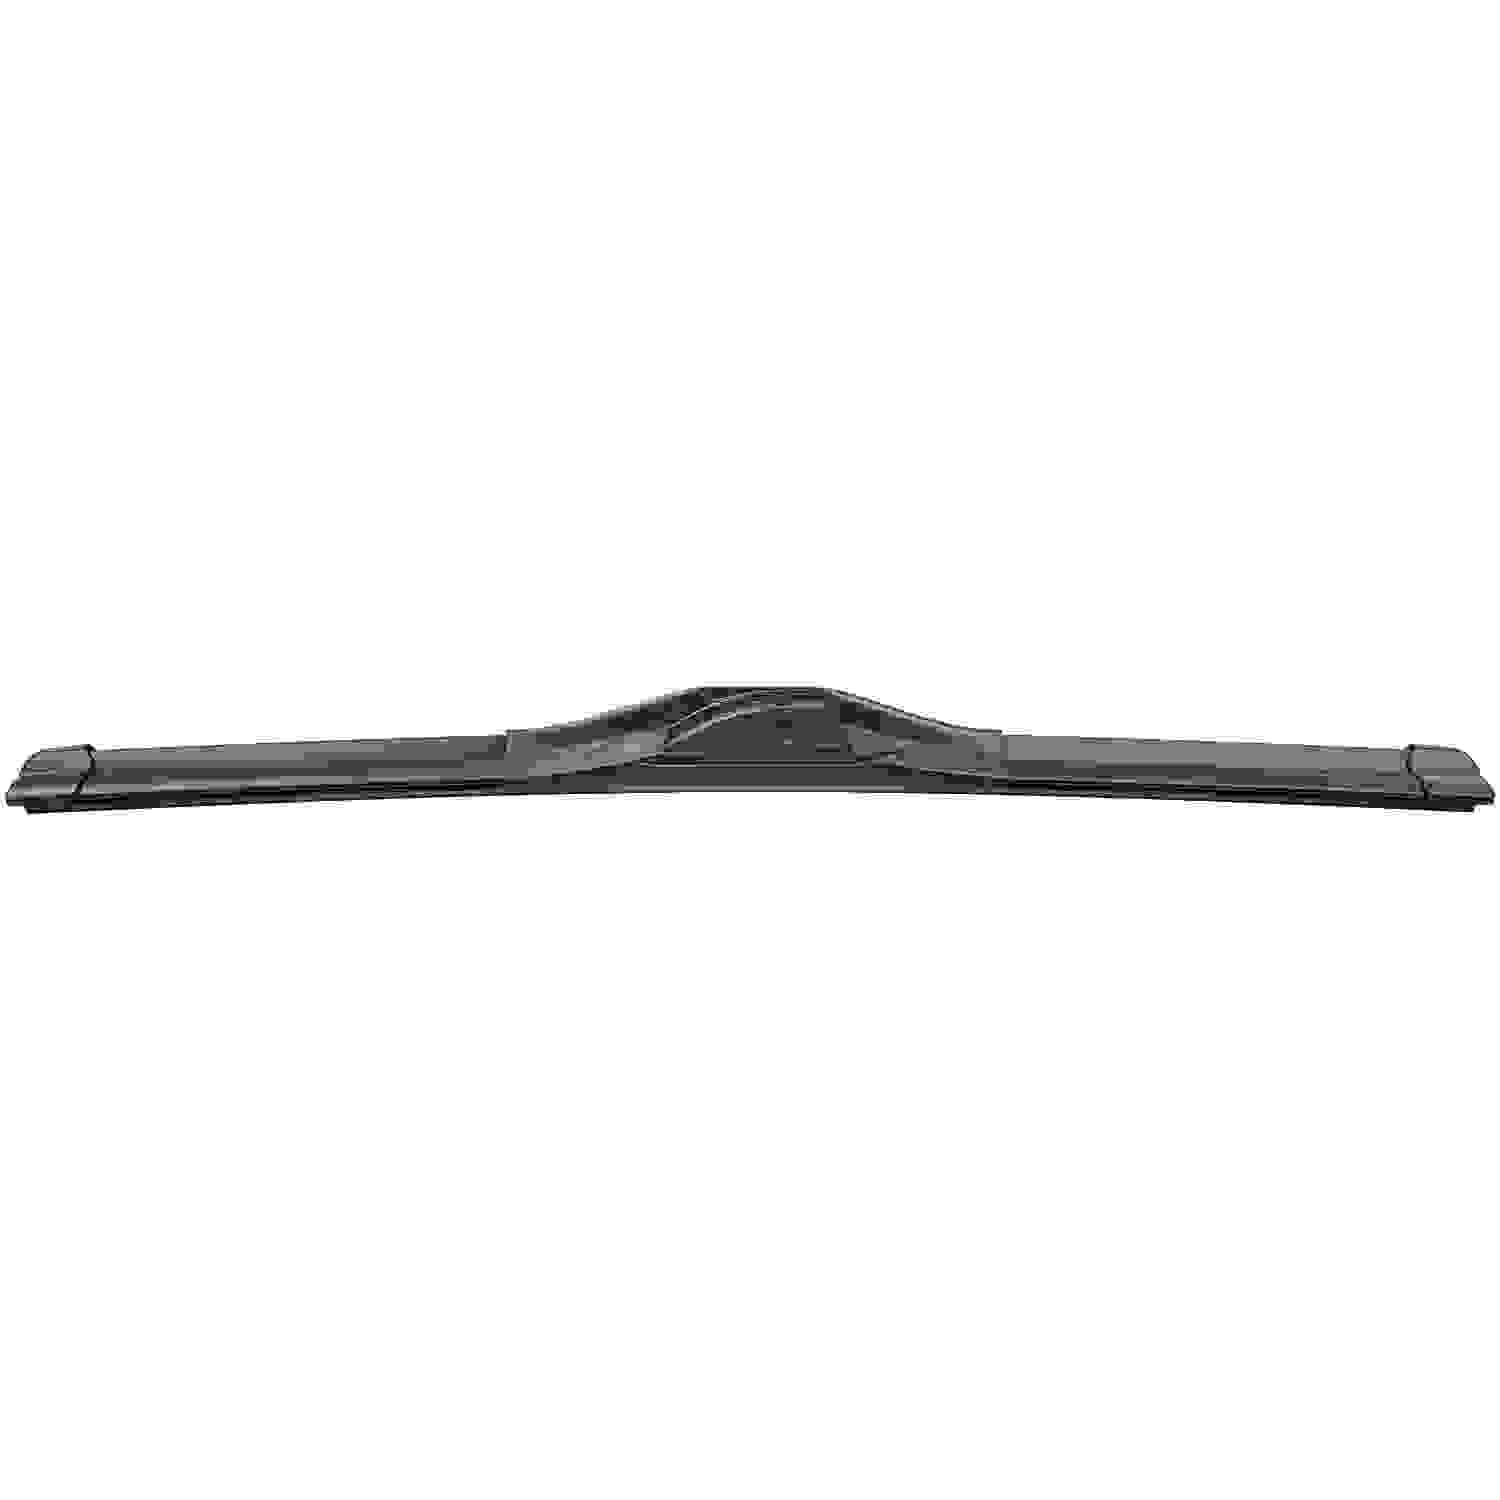 ANCO WIPER PRODUCTS - Contour Wiper Blade (Front) - ANC C-20-UB